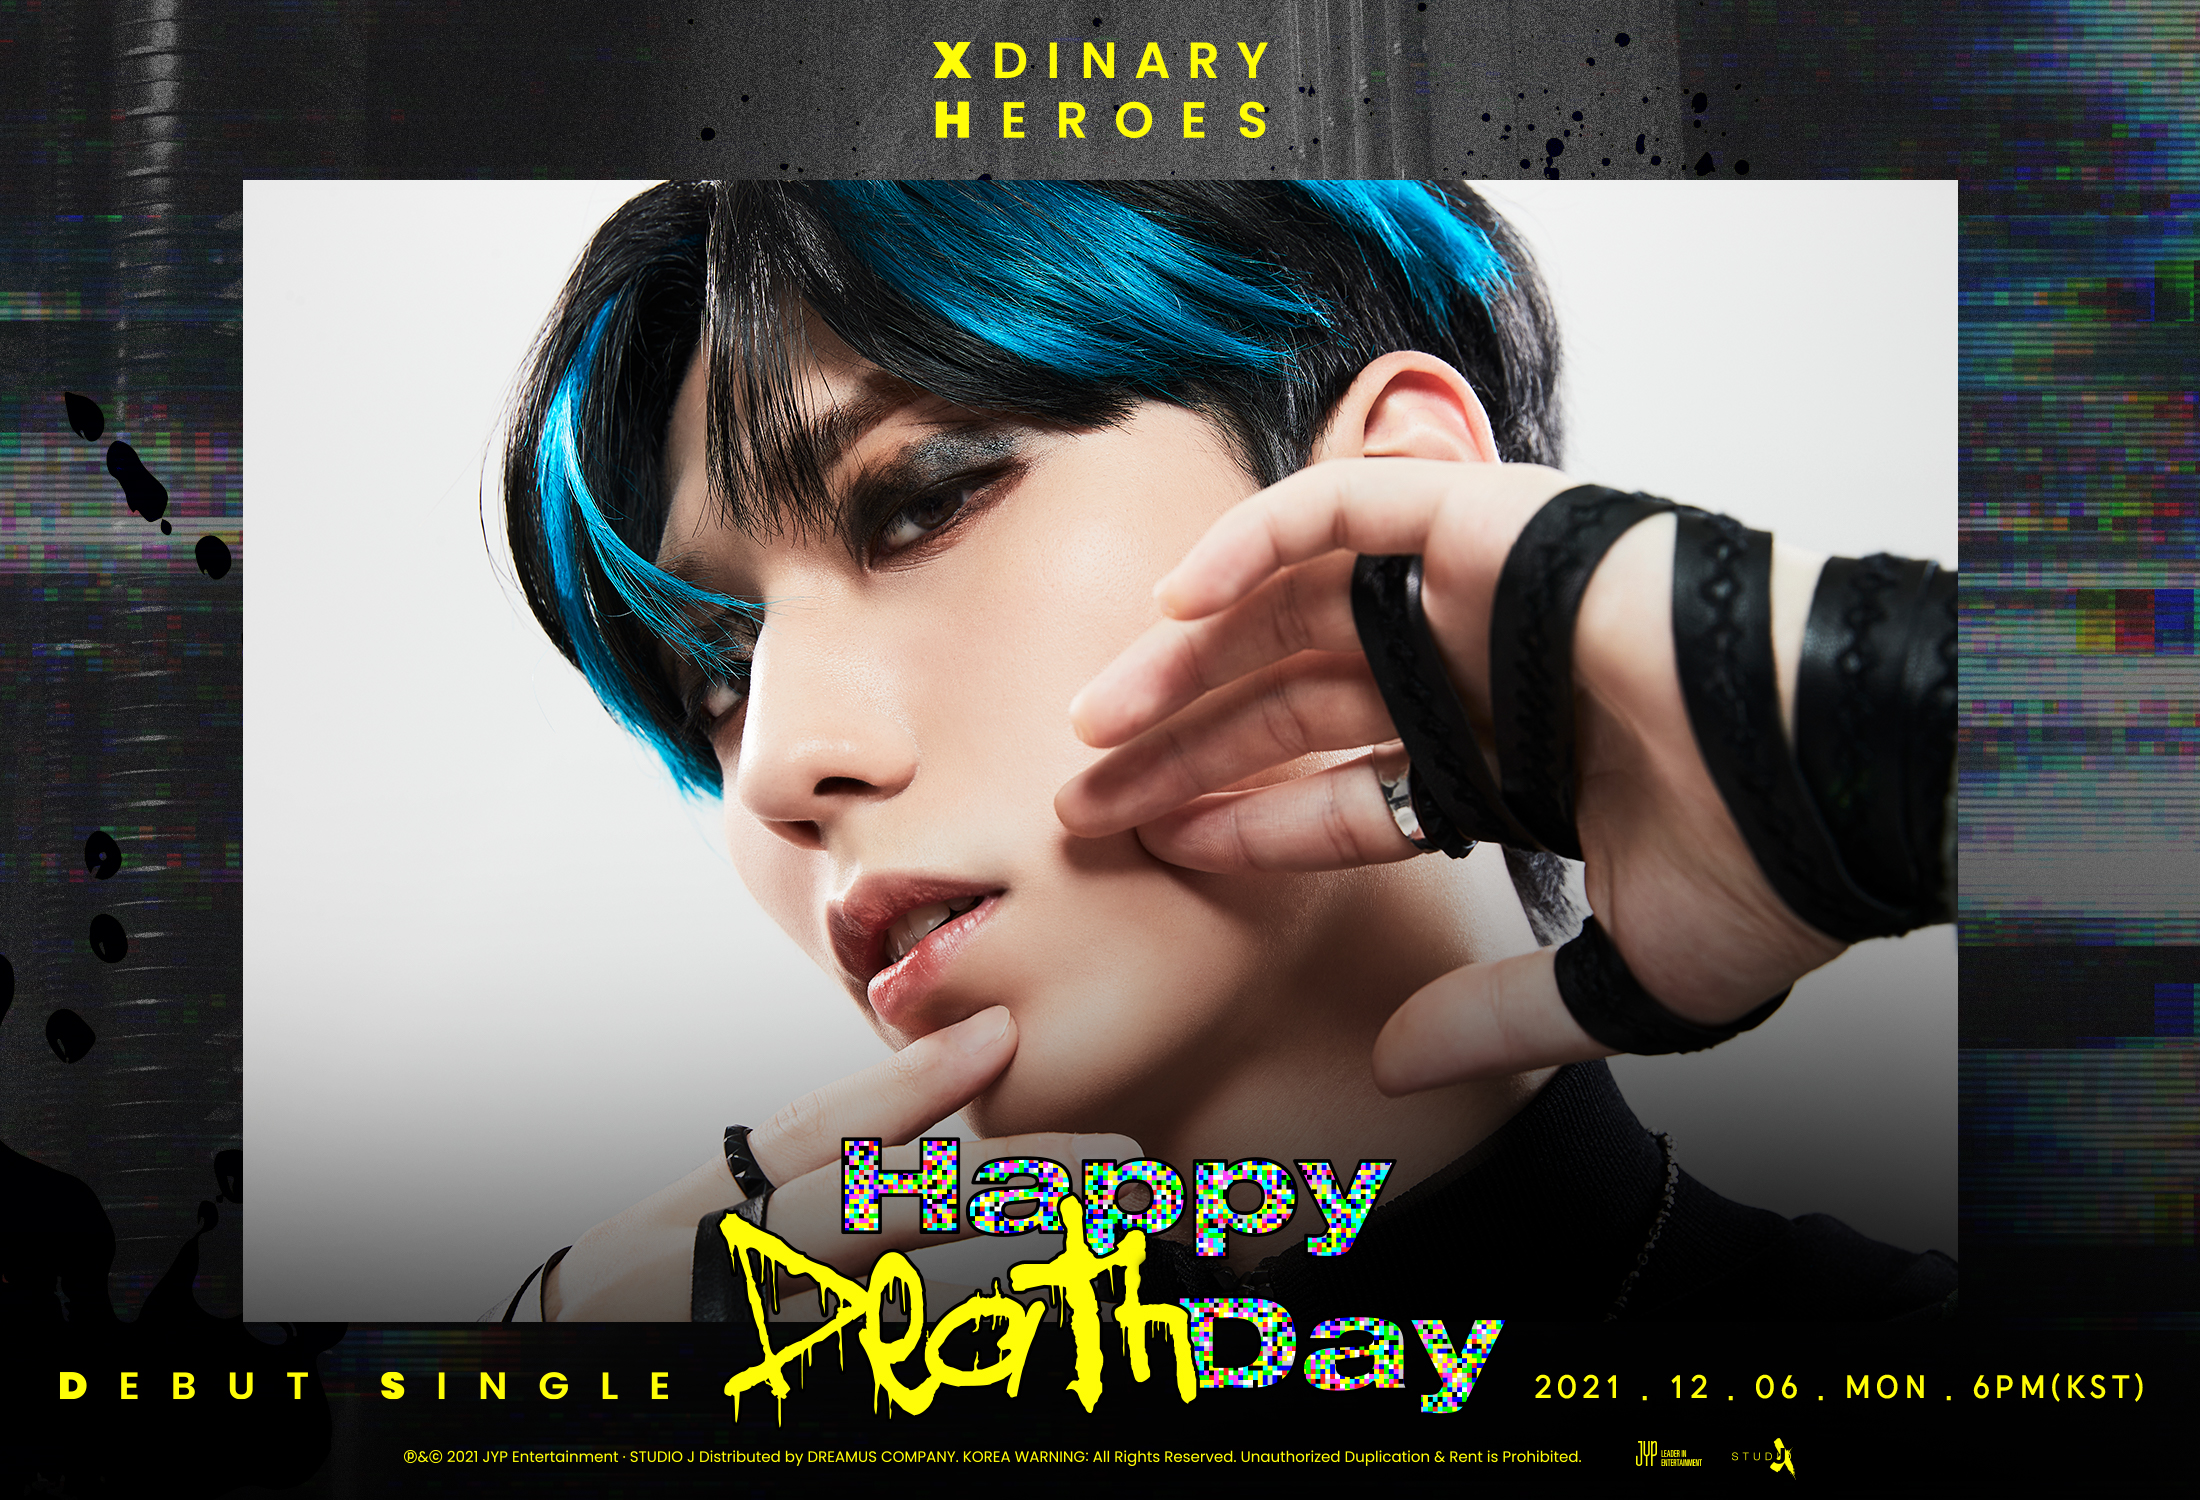 Xdinary Heroes 'Happy Death Day' concept photo